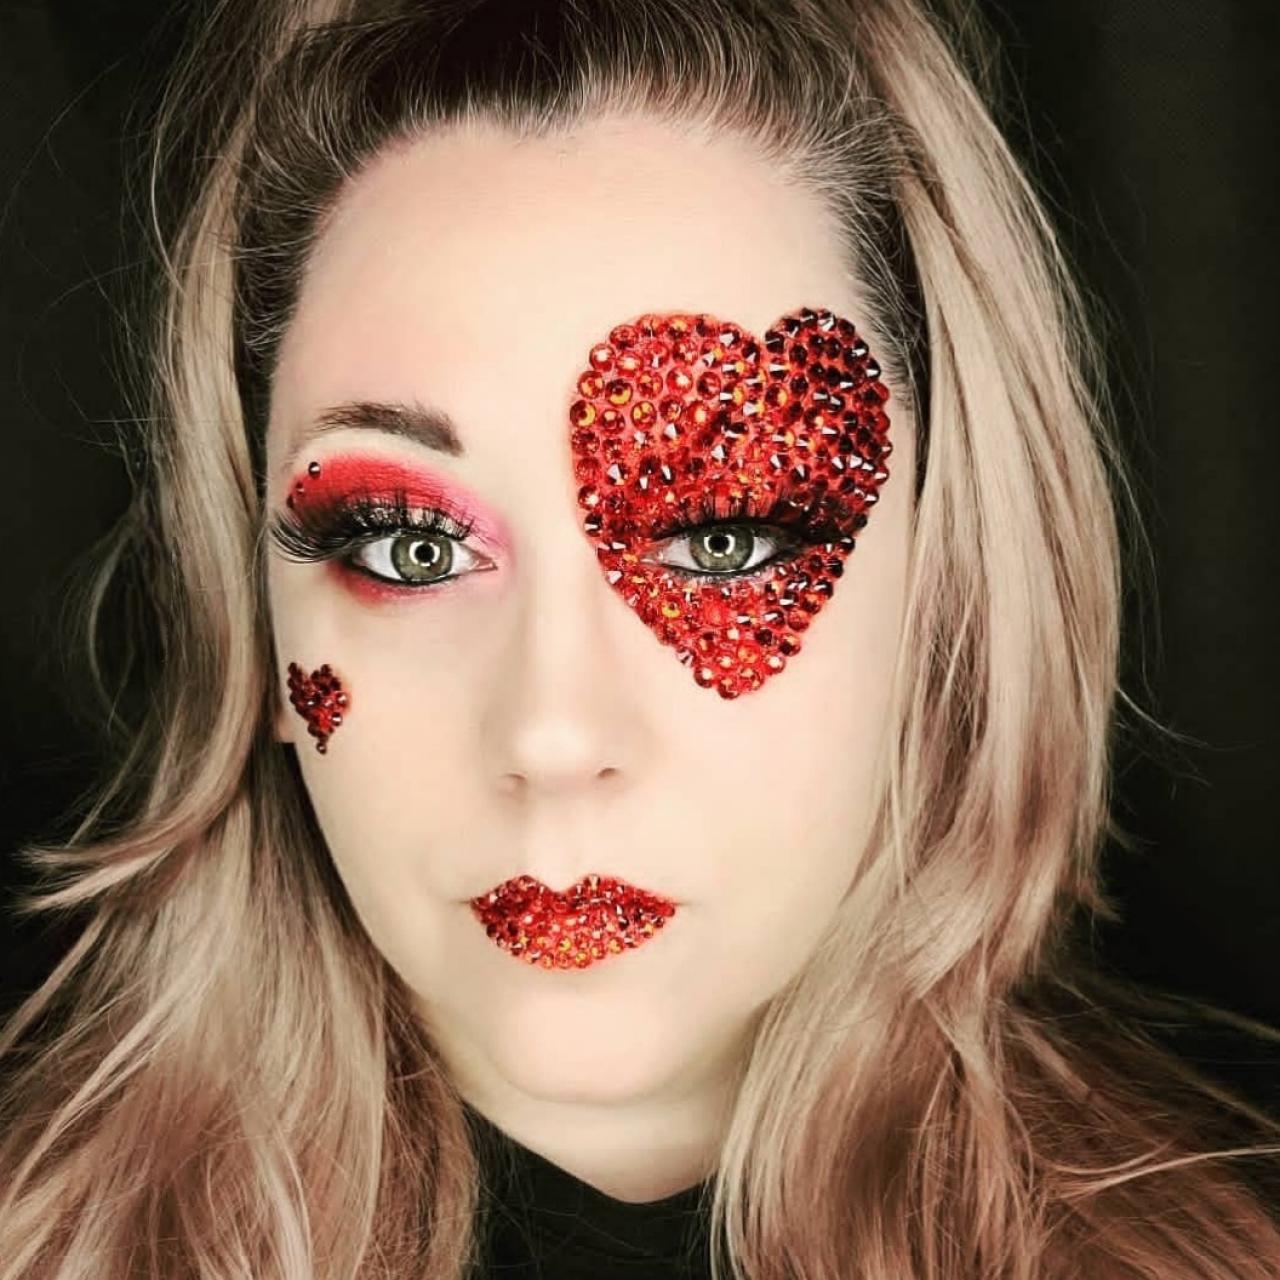 46 Halloween 2021 Face Paint Ideas That Will Make You Want To Get Extra  With Makeup Again — See Photos